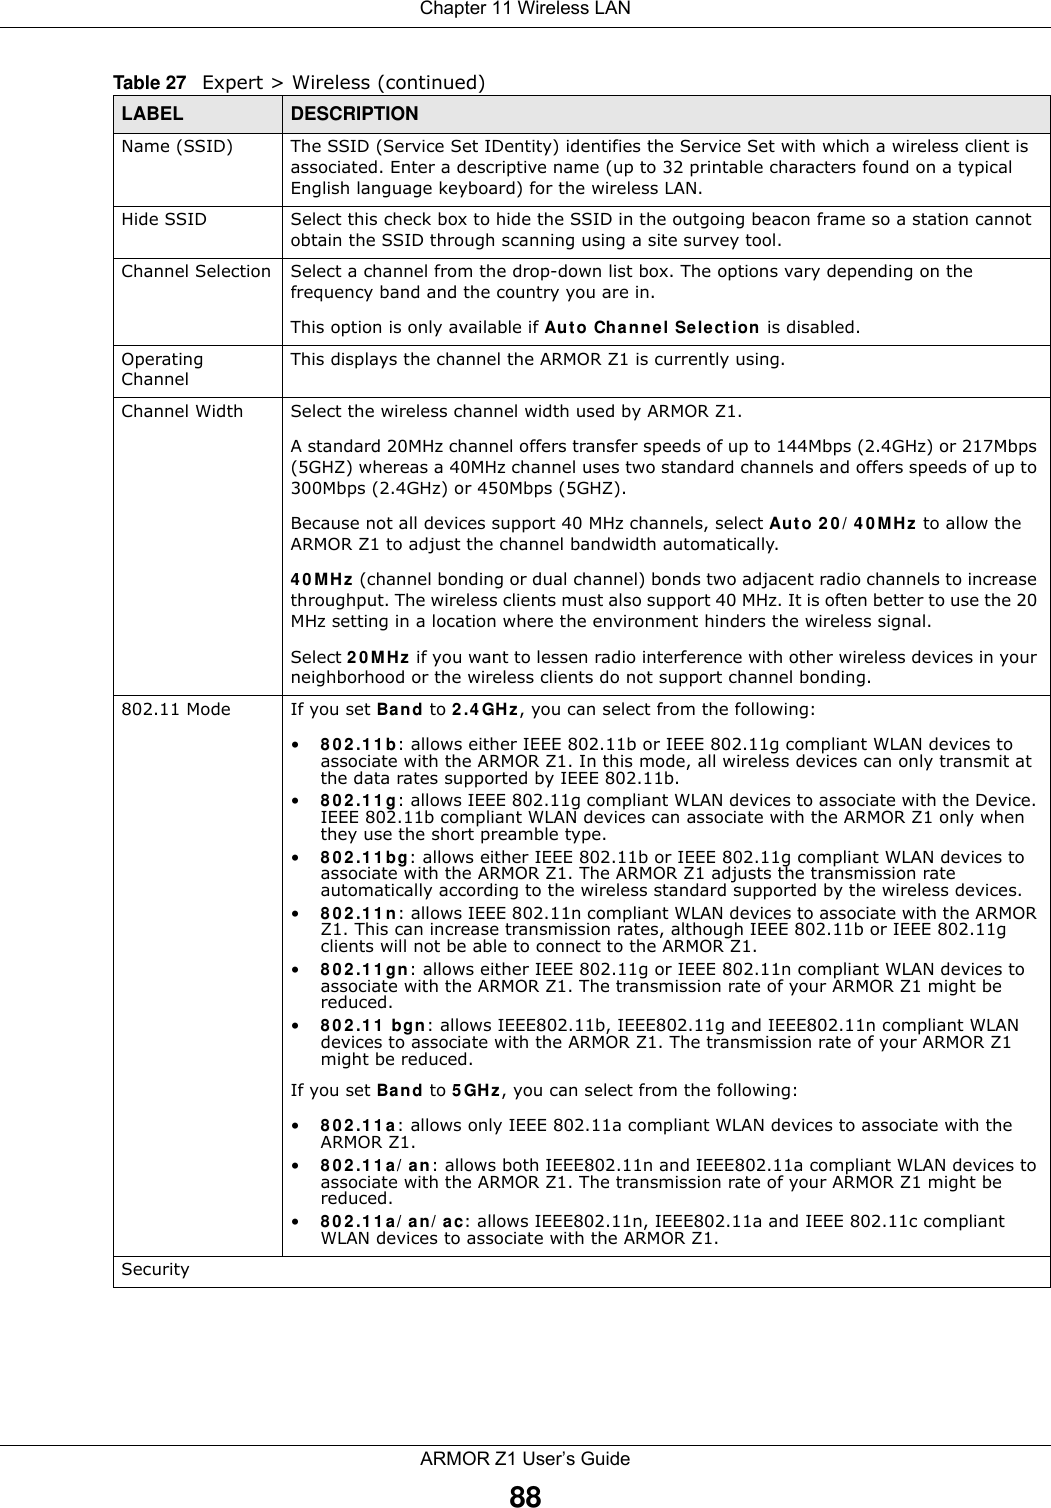 Chapter 11 Wireless LANARMOR Z1 User’s Guide88Name (SSID)  The SSID (Service Set IDentity) identifies the Service Set with which a wireless client is associated. Enter a descriptive name (up to 32 printable characters found on a typical English language keyboard) for the wireless LAN. Hide SSID Select this check box to hide the SSID in the outgoing beacon frame so a station cannot obtain the SSID through scanning using a site survey tool.Channel Selection Select a channel from the drop-down list box. The options vary depending on the frequency band and the country you are in.This option is only available if Auto Channel Selection is disabled.Operating Channel This displays the channel the ARMOR Z1 is currently using.Channel Width Select the wireless channel width used by ARMOR Z1.A standard 20MHz channel offers transfer speeds of up to 144Mbps (2.4GHz) or 217Mbps (5GHZ) whereas a 40MHz channel uses two standard channels and offers speeds of up to 300Mbps (2.4GHz) or 450Mbps (5GHZ). Because not all devices support 40 MHz channels, select Auto 20/40MHz to allow the ARMOR Z1 to adjust the channel bandwidth automatically.40MHz (channel bonding or dual channel) bonds two adjacent radio channels to increase throughput. The wireless clients must also support 40 MHz. It is often better to use the 20 MHz setting in a location where the environment hinders the wireless signal. Select 20MHz if you want to lessen radio interference with other wireless devices in your neighborhood or the wireless clients do not support channel bonding.802.11 Mode If you set Band to 2.4GHz, you can select from the following:•802.11b: allows either IEEE 802.11b or IEEE 802.11g compliant WLAN devices to associate with the ARMOR Z1. In this mode, all wireless devices can only transmit at the data rates supported by IEEE 802.11b.•802.11g: allows IEEE 802.11g compliant WLAN devices to associate with the Device. IEEE 802.11b compliant WLAN devices can associate with the ARMOR Z1 only when they use the short preamble type.•802.11bg: allows either IEEE 802.11b or IEEE 802.11g compliant WLAN devices to associate with the ARMOR Z1. The ARMOR Z1 adjusts the transmission rate automatically according to the wireless standard supported by the wireless devices.•802.11n: allows IEEE 802.11n compliant WLAN devices to associate with the ARMOR Z1. This can increase transmission rates, although IEEE 802.11b or IEEE 802.11g clients will not be able to connect to the ARMOR Z1. •802.11gn: allows either IEEE 802.11g or IEEE 802.11n compliant WLAN devices to associate with the ARMOR Z1. The transmission rate of your ARMOR Z1 might be reduced.•802.11 bgn: allows IEEE802.11b, IEEE802.11g and IEEE802.11n compliant WLAN devices to associate with the ARMOR Z1. The transmission rate of your ARMOR Z1 might be reduced.If you set Band to 5GHz, you can select from the following:•802.11a: allows only IEEE 802.11a compliant WLAN devices to associate with the ARMOR Z1.•802.11a/an: allows both IEEE802.11n and IEEE802.11a compliant WLAN devices to associate with the ARMOR Z1. The transmission rate of your ARMOR Z1 might be reduced.•802.11a/an/ac: allows IEEE802.11n, IEEE802.11a and IEEE 802.11c compliant WLAN devices to associate with the ARMOR Z1.Security Table 27   Expert &gt; Wireless (continued) LABEL DESCRIPTION